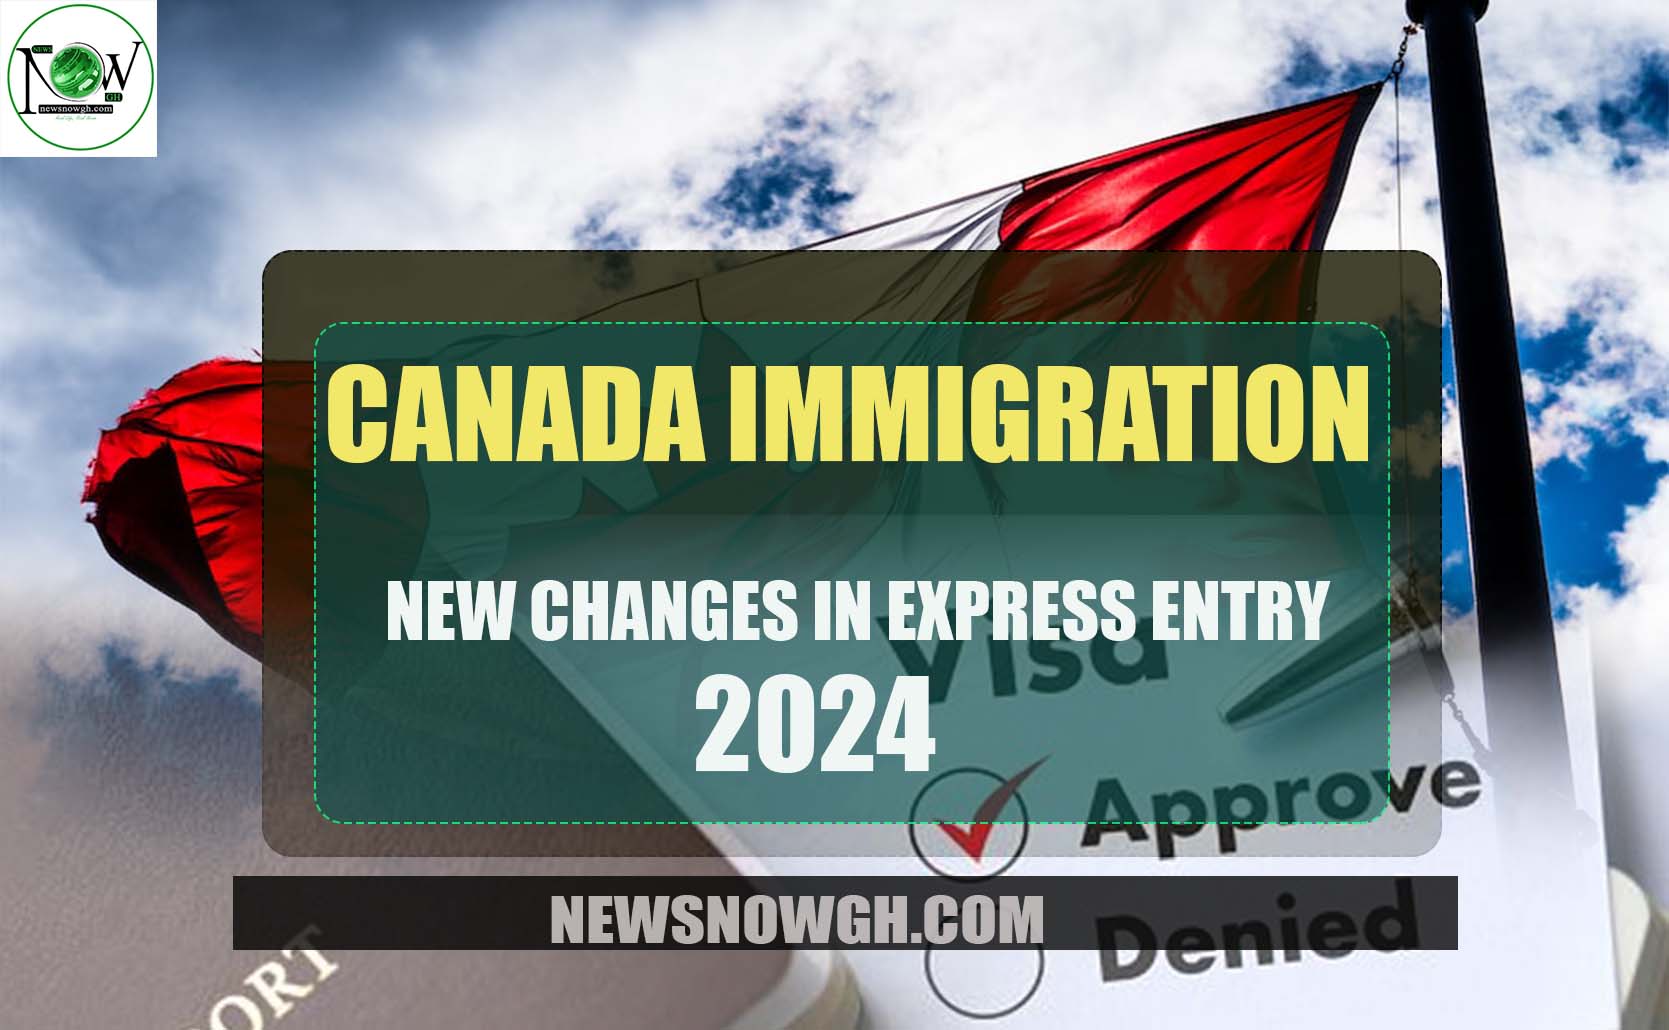 Canada Immigration New Changes in Express Entry 2024 IRCC